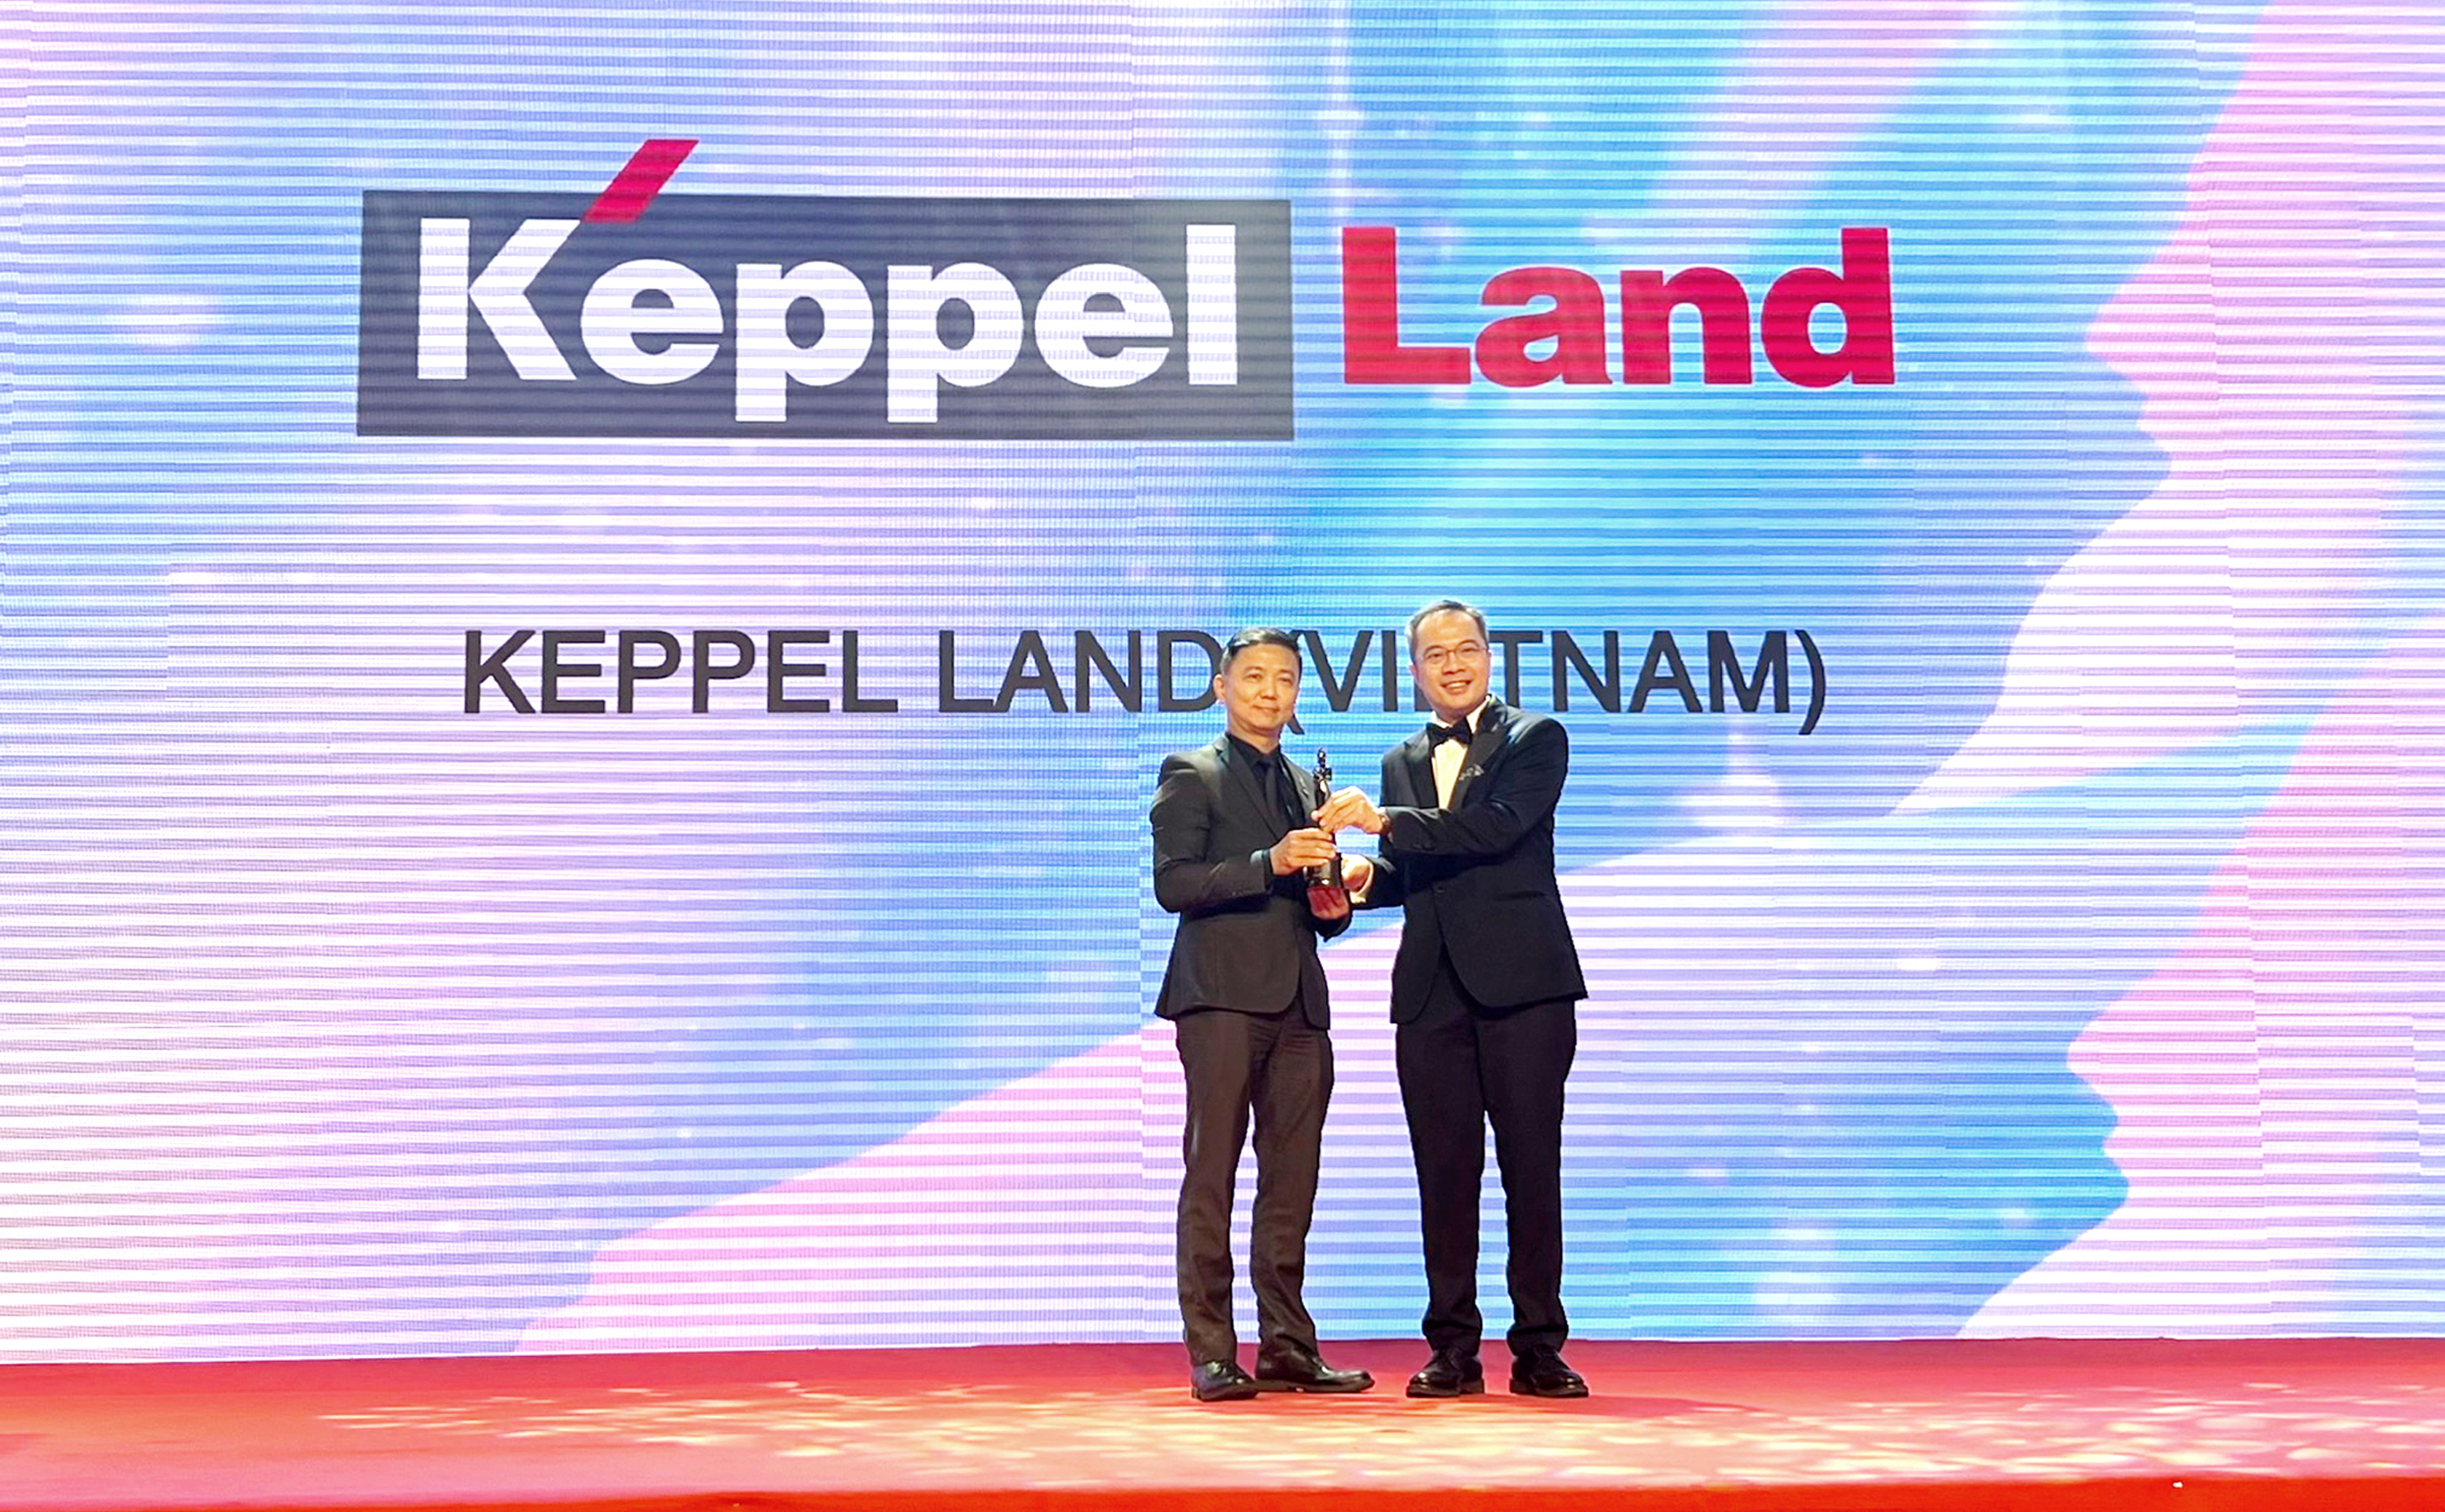 Keppel Land Vietnam named one of Asia’s best employers for third year running